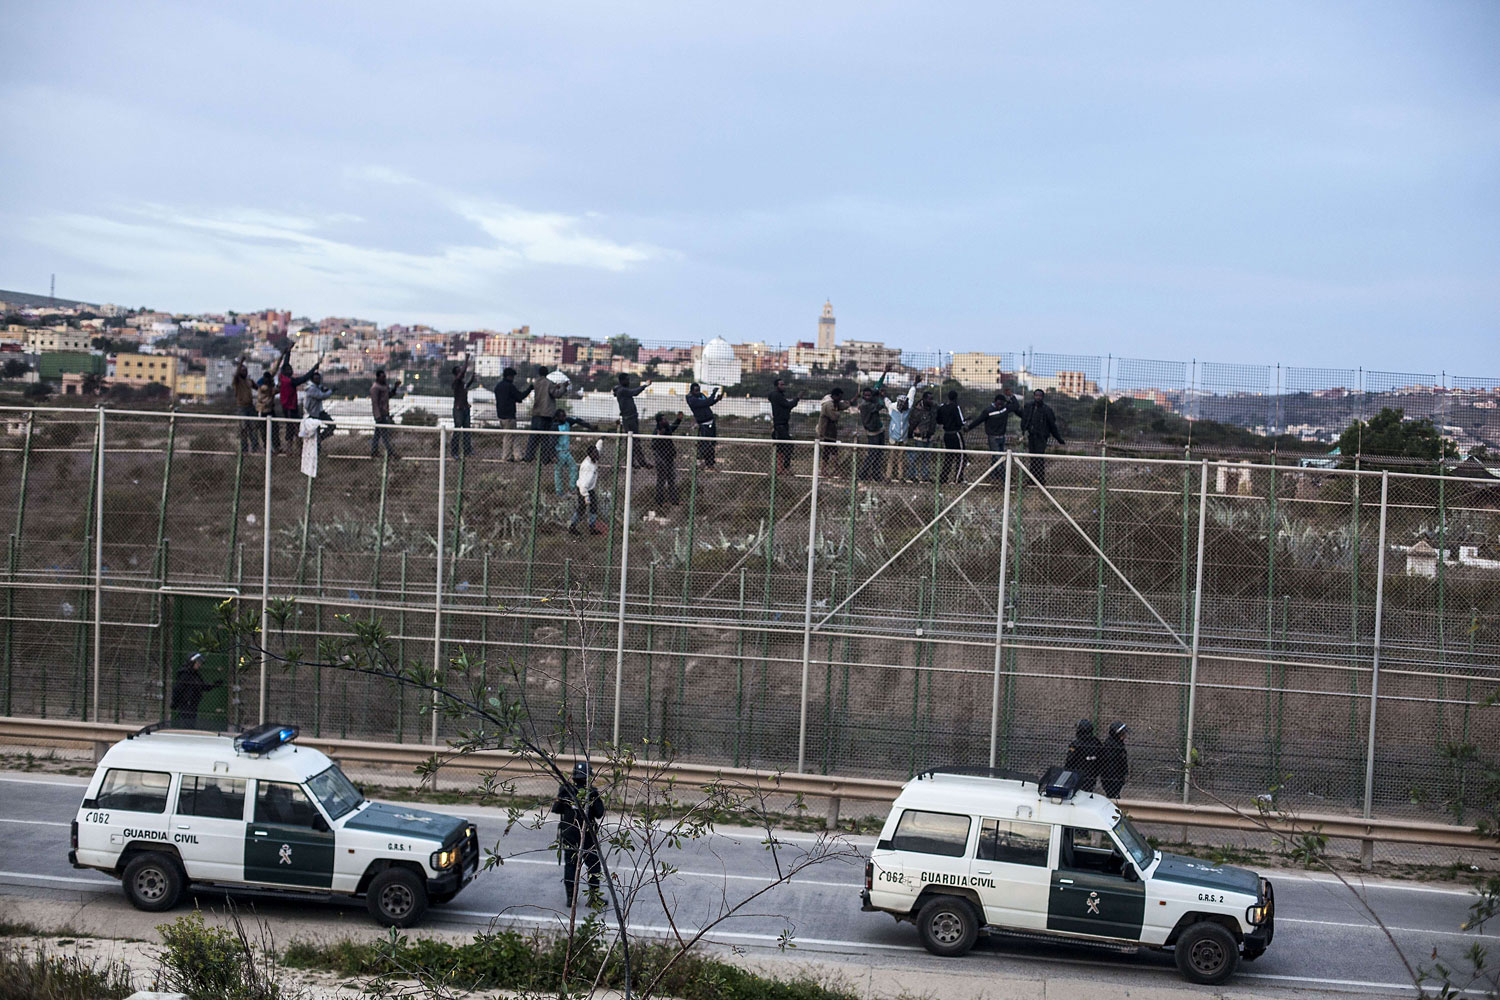 Spanish policemen watch would-be immigrants reacting between two fences near Beni Enza, into the north African Spanish enclave of Melilla on March 28, 2014.